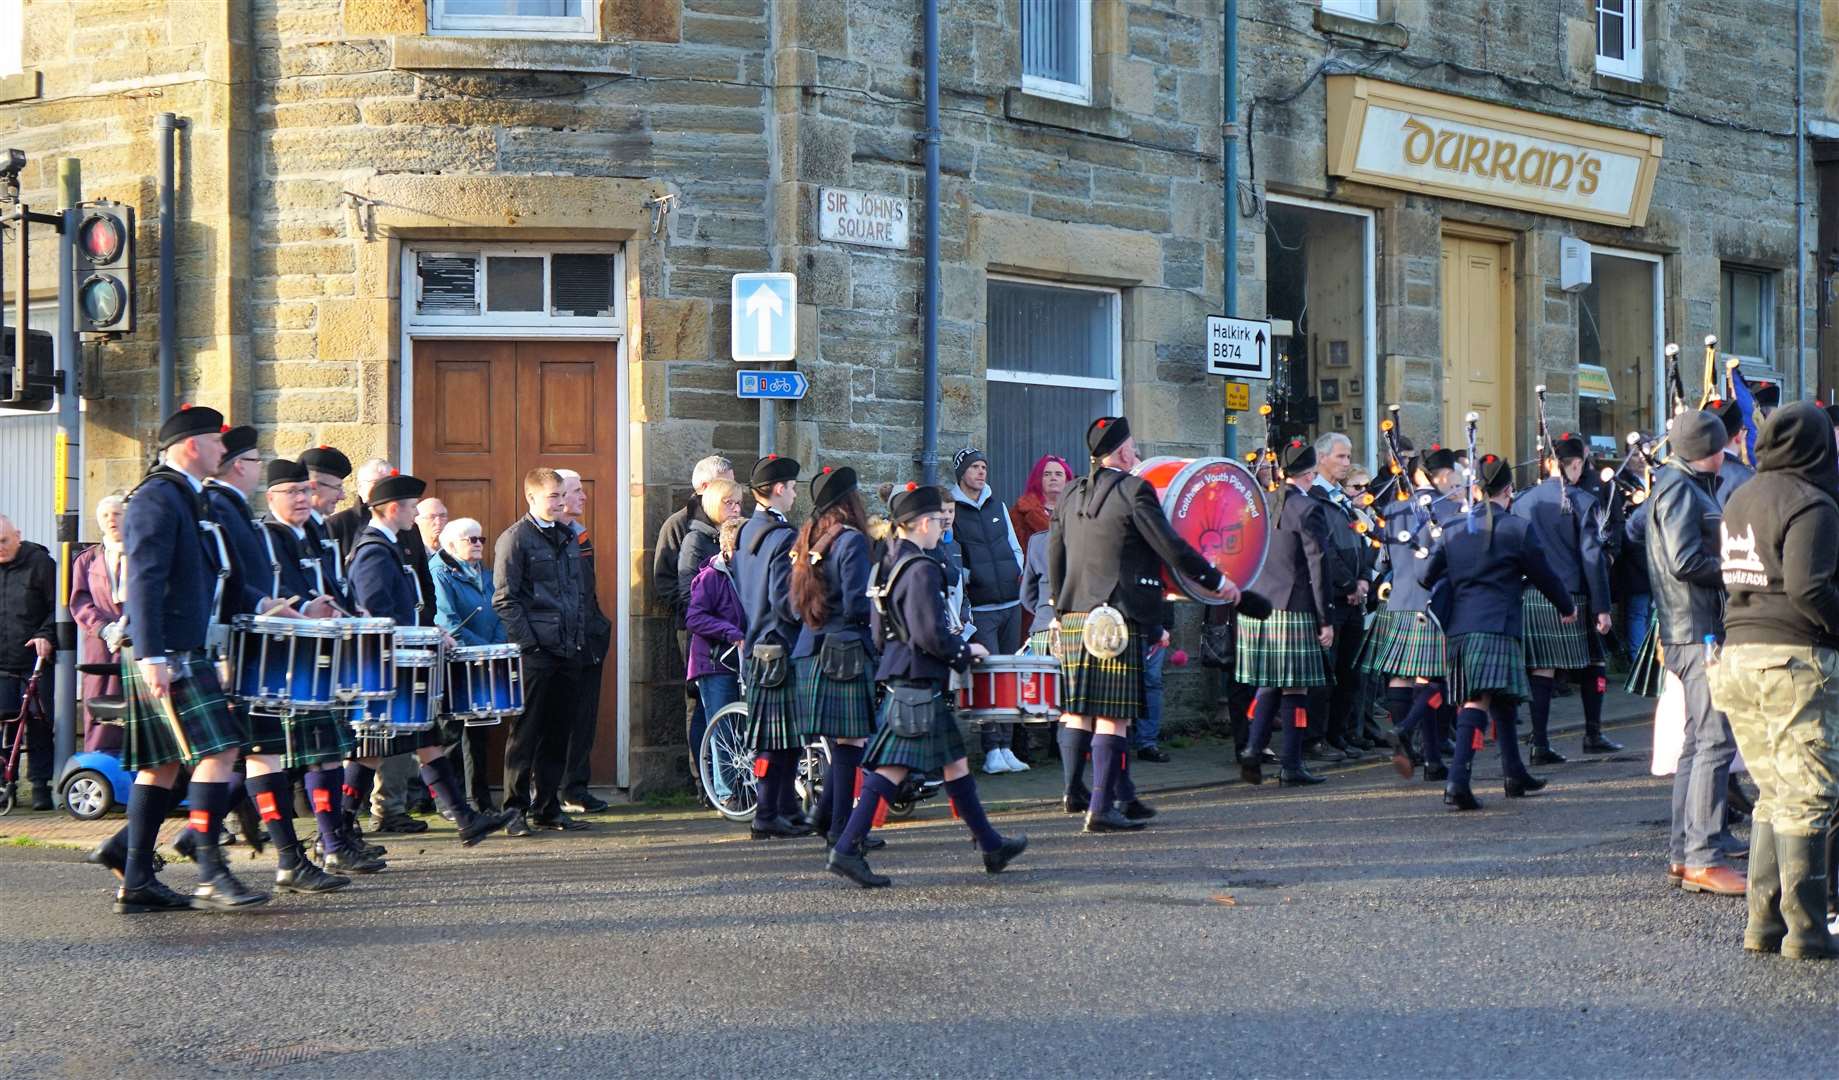 Band members at the end of the parade. Picture: DGS